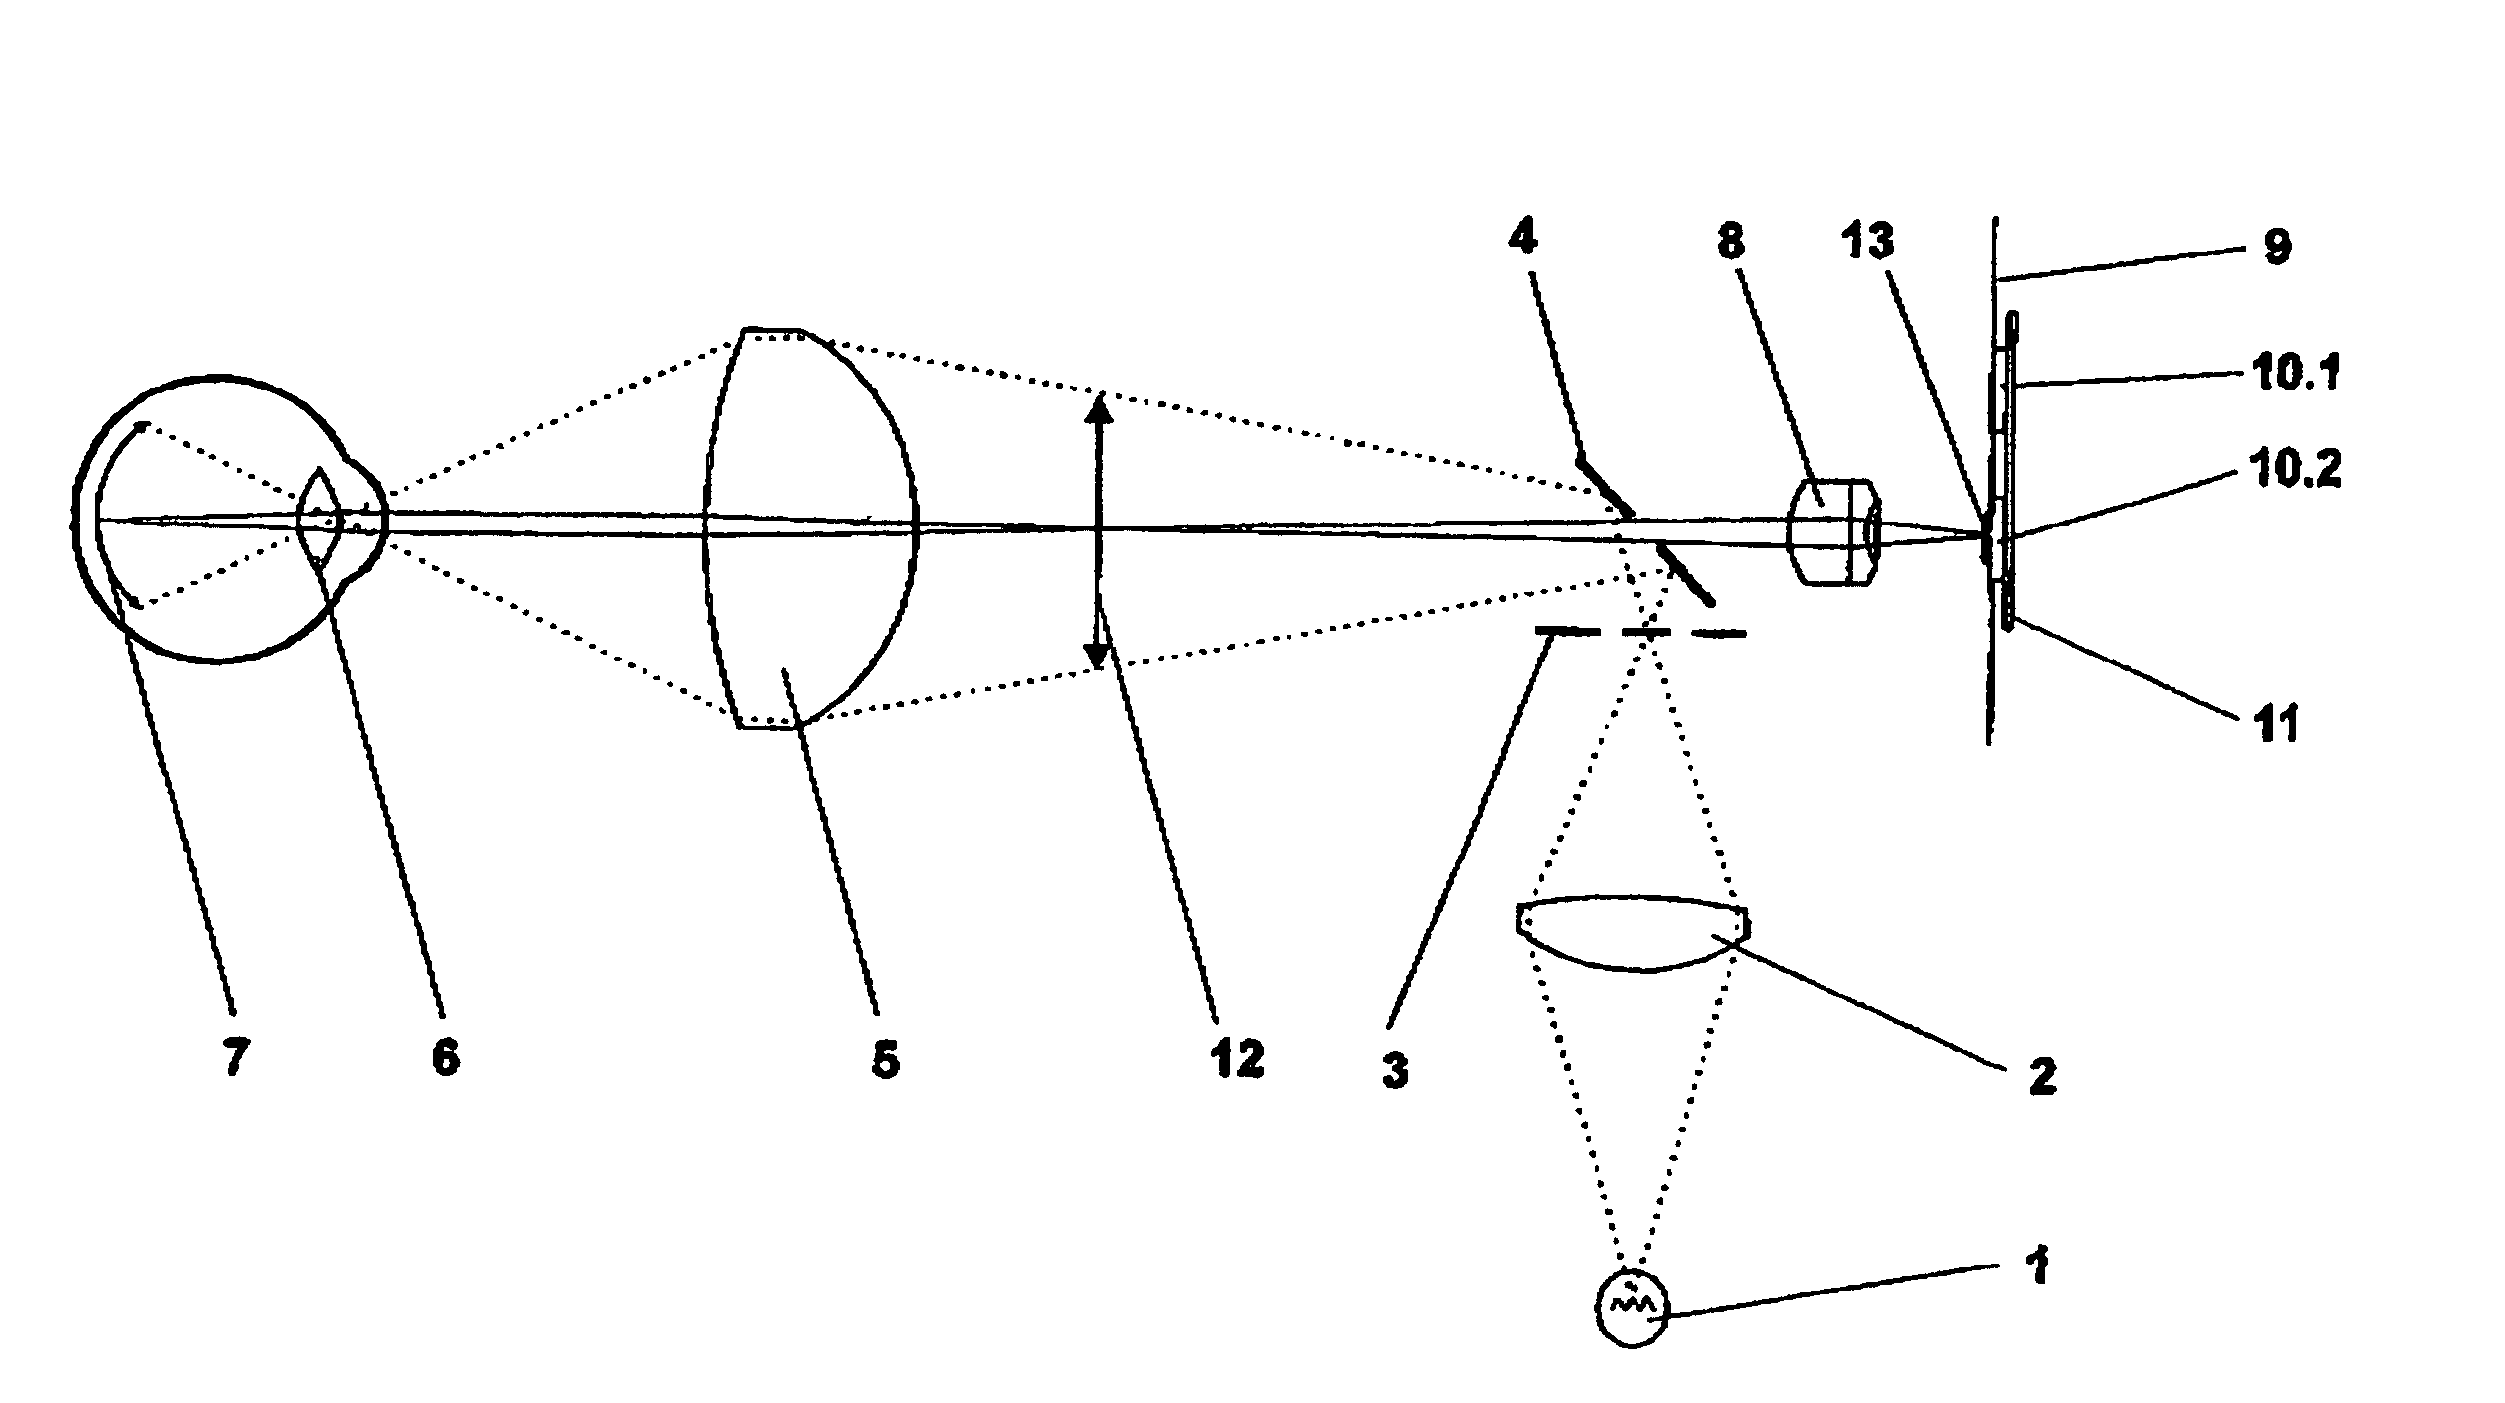 Device for imaging and observing an eye at a selectable image scale